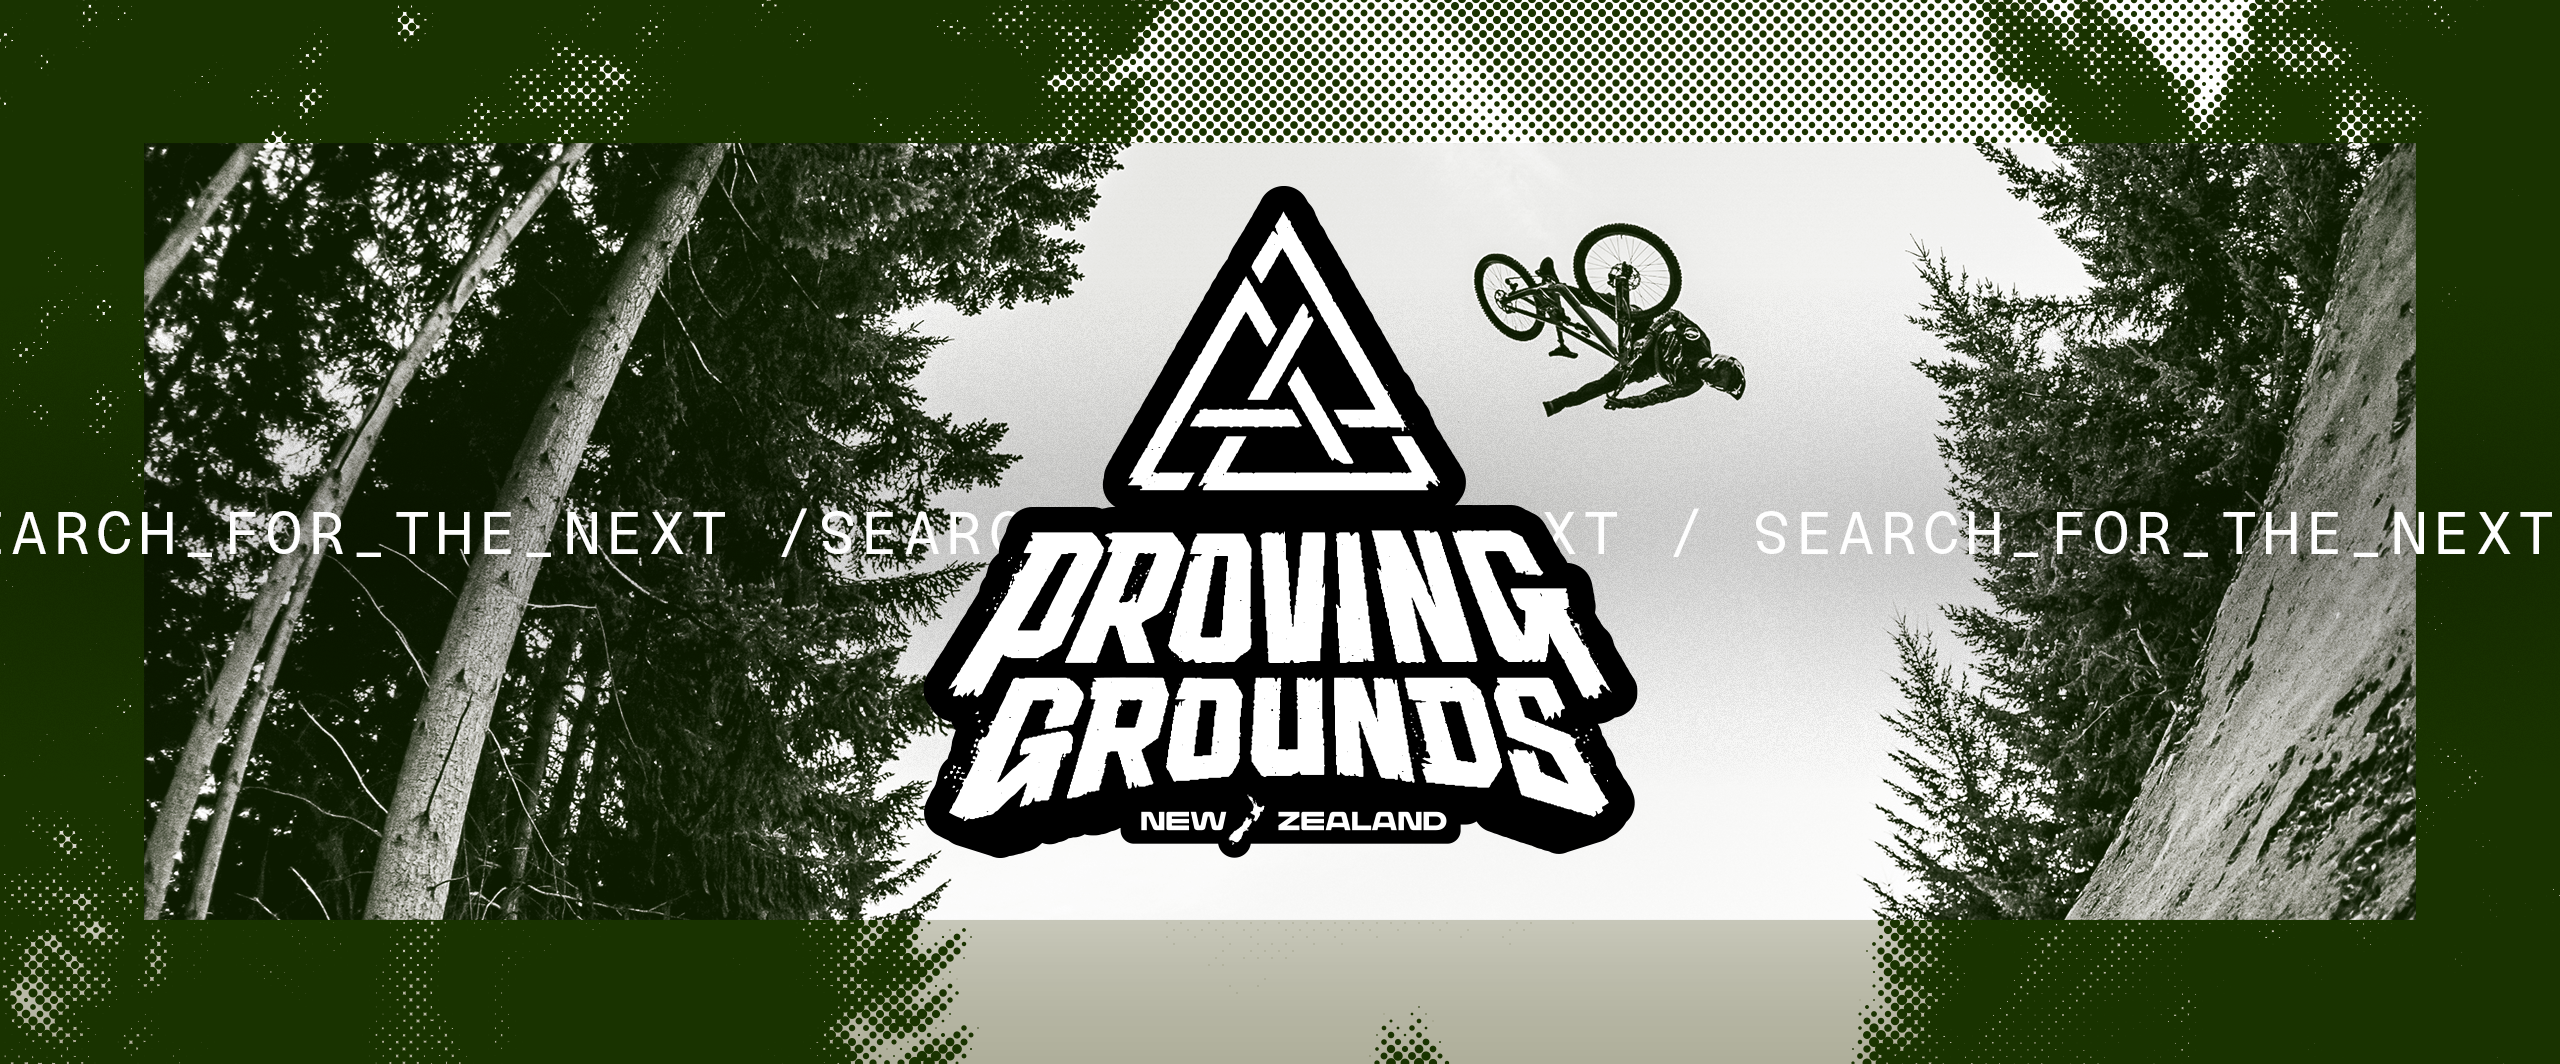 search for proving grounds